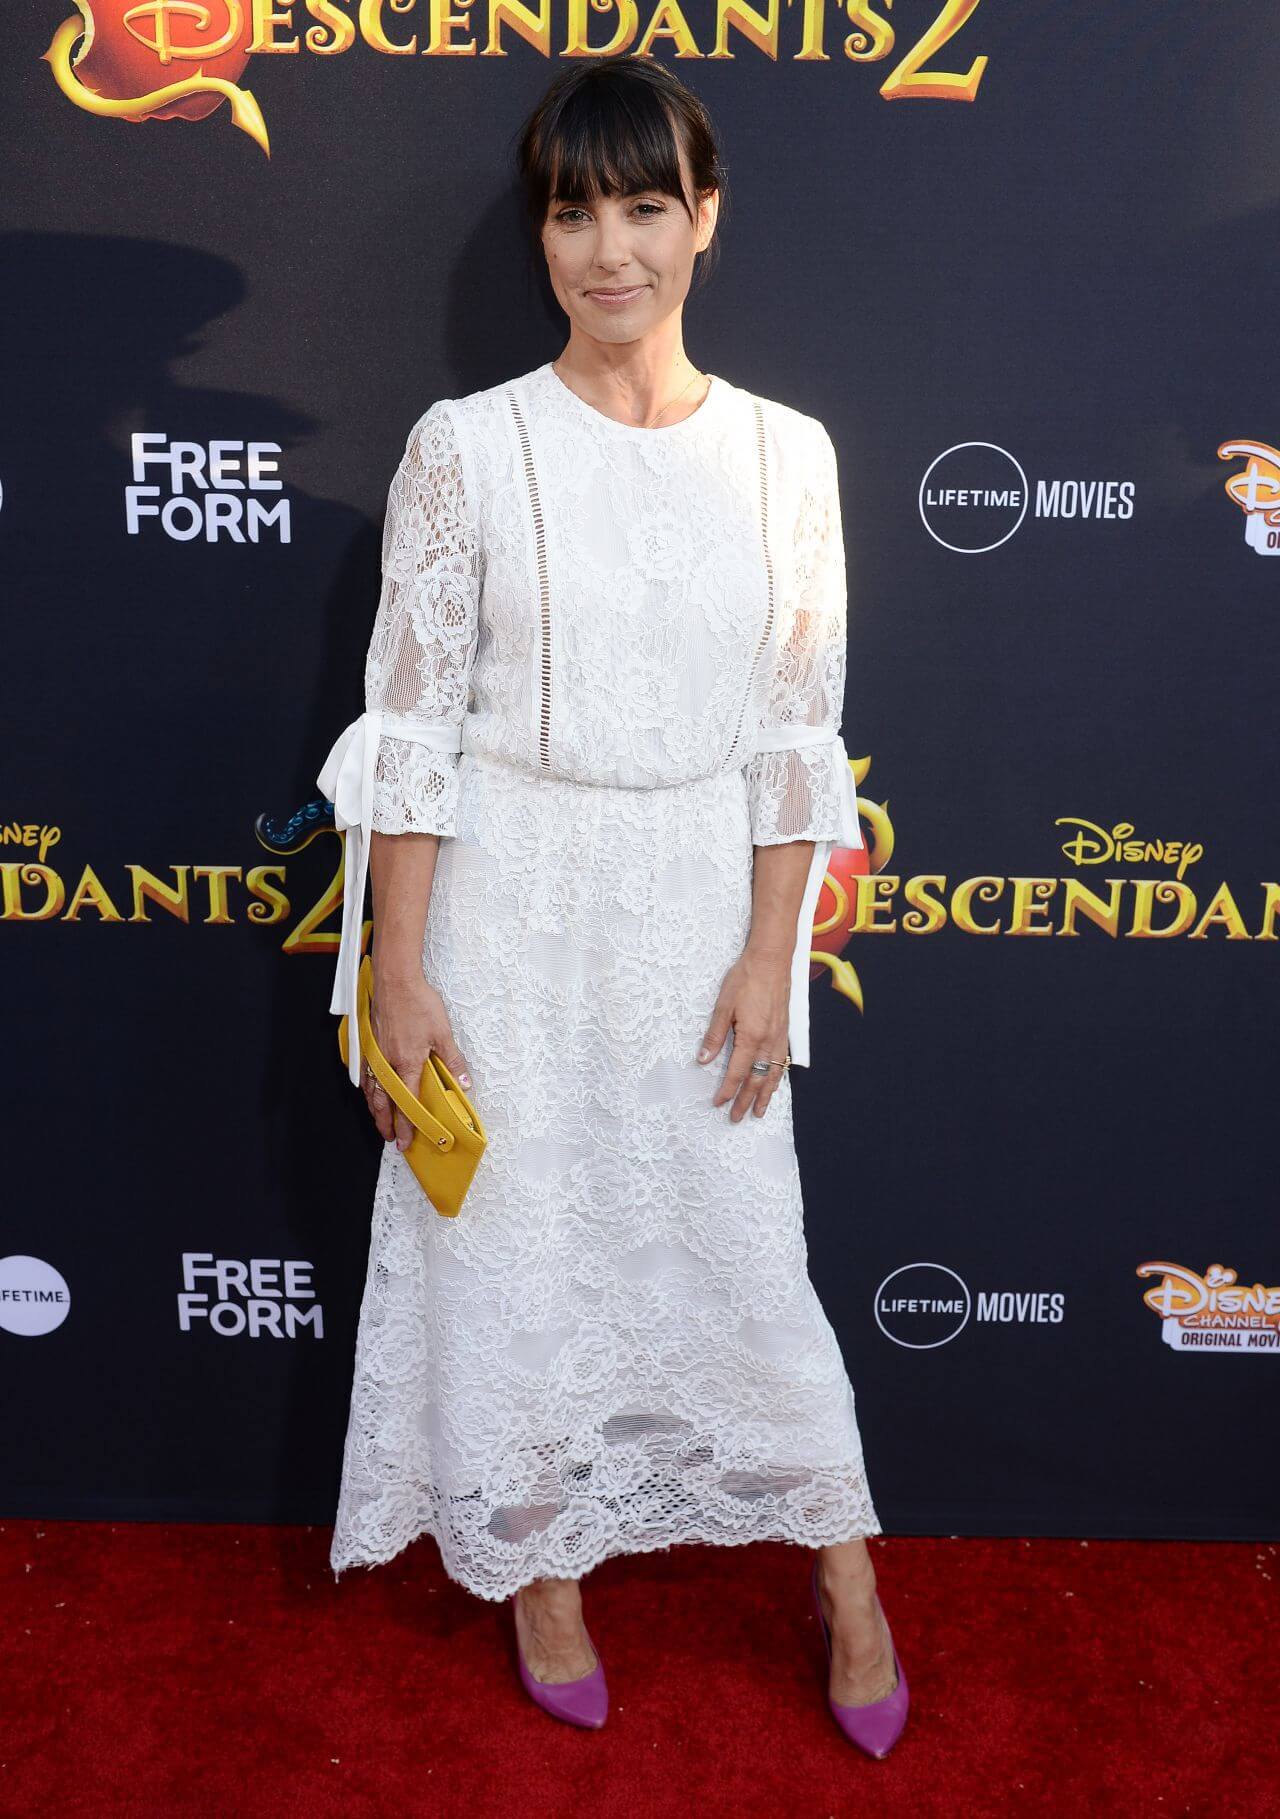 Constance Zimmer Lovely Looks In White Lace Design Full Sleeves Long Gown Dress